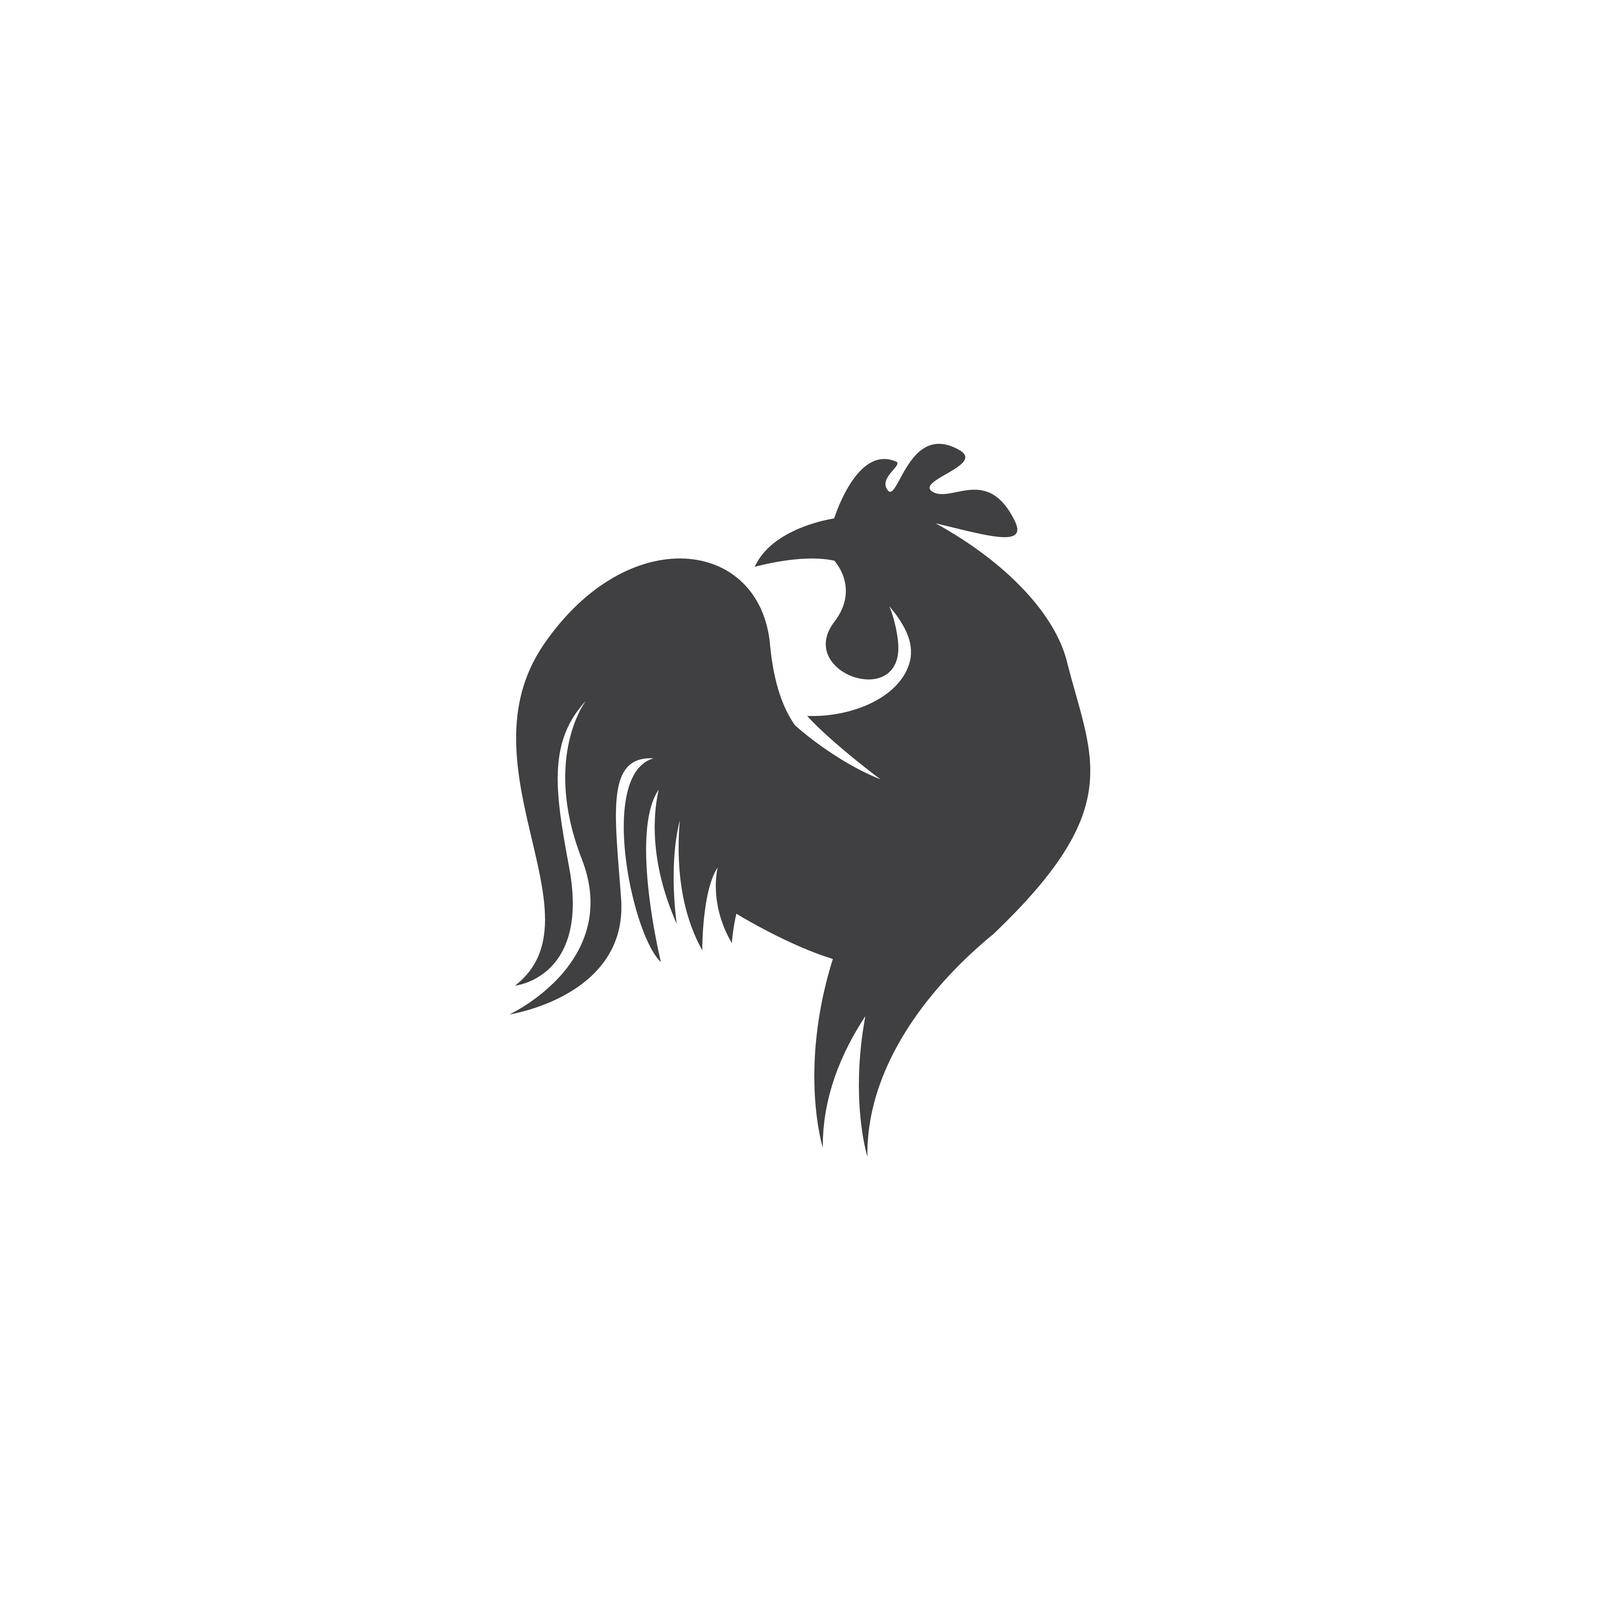 Rooster illustration by awk